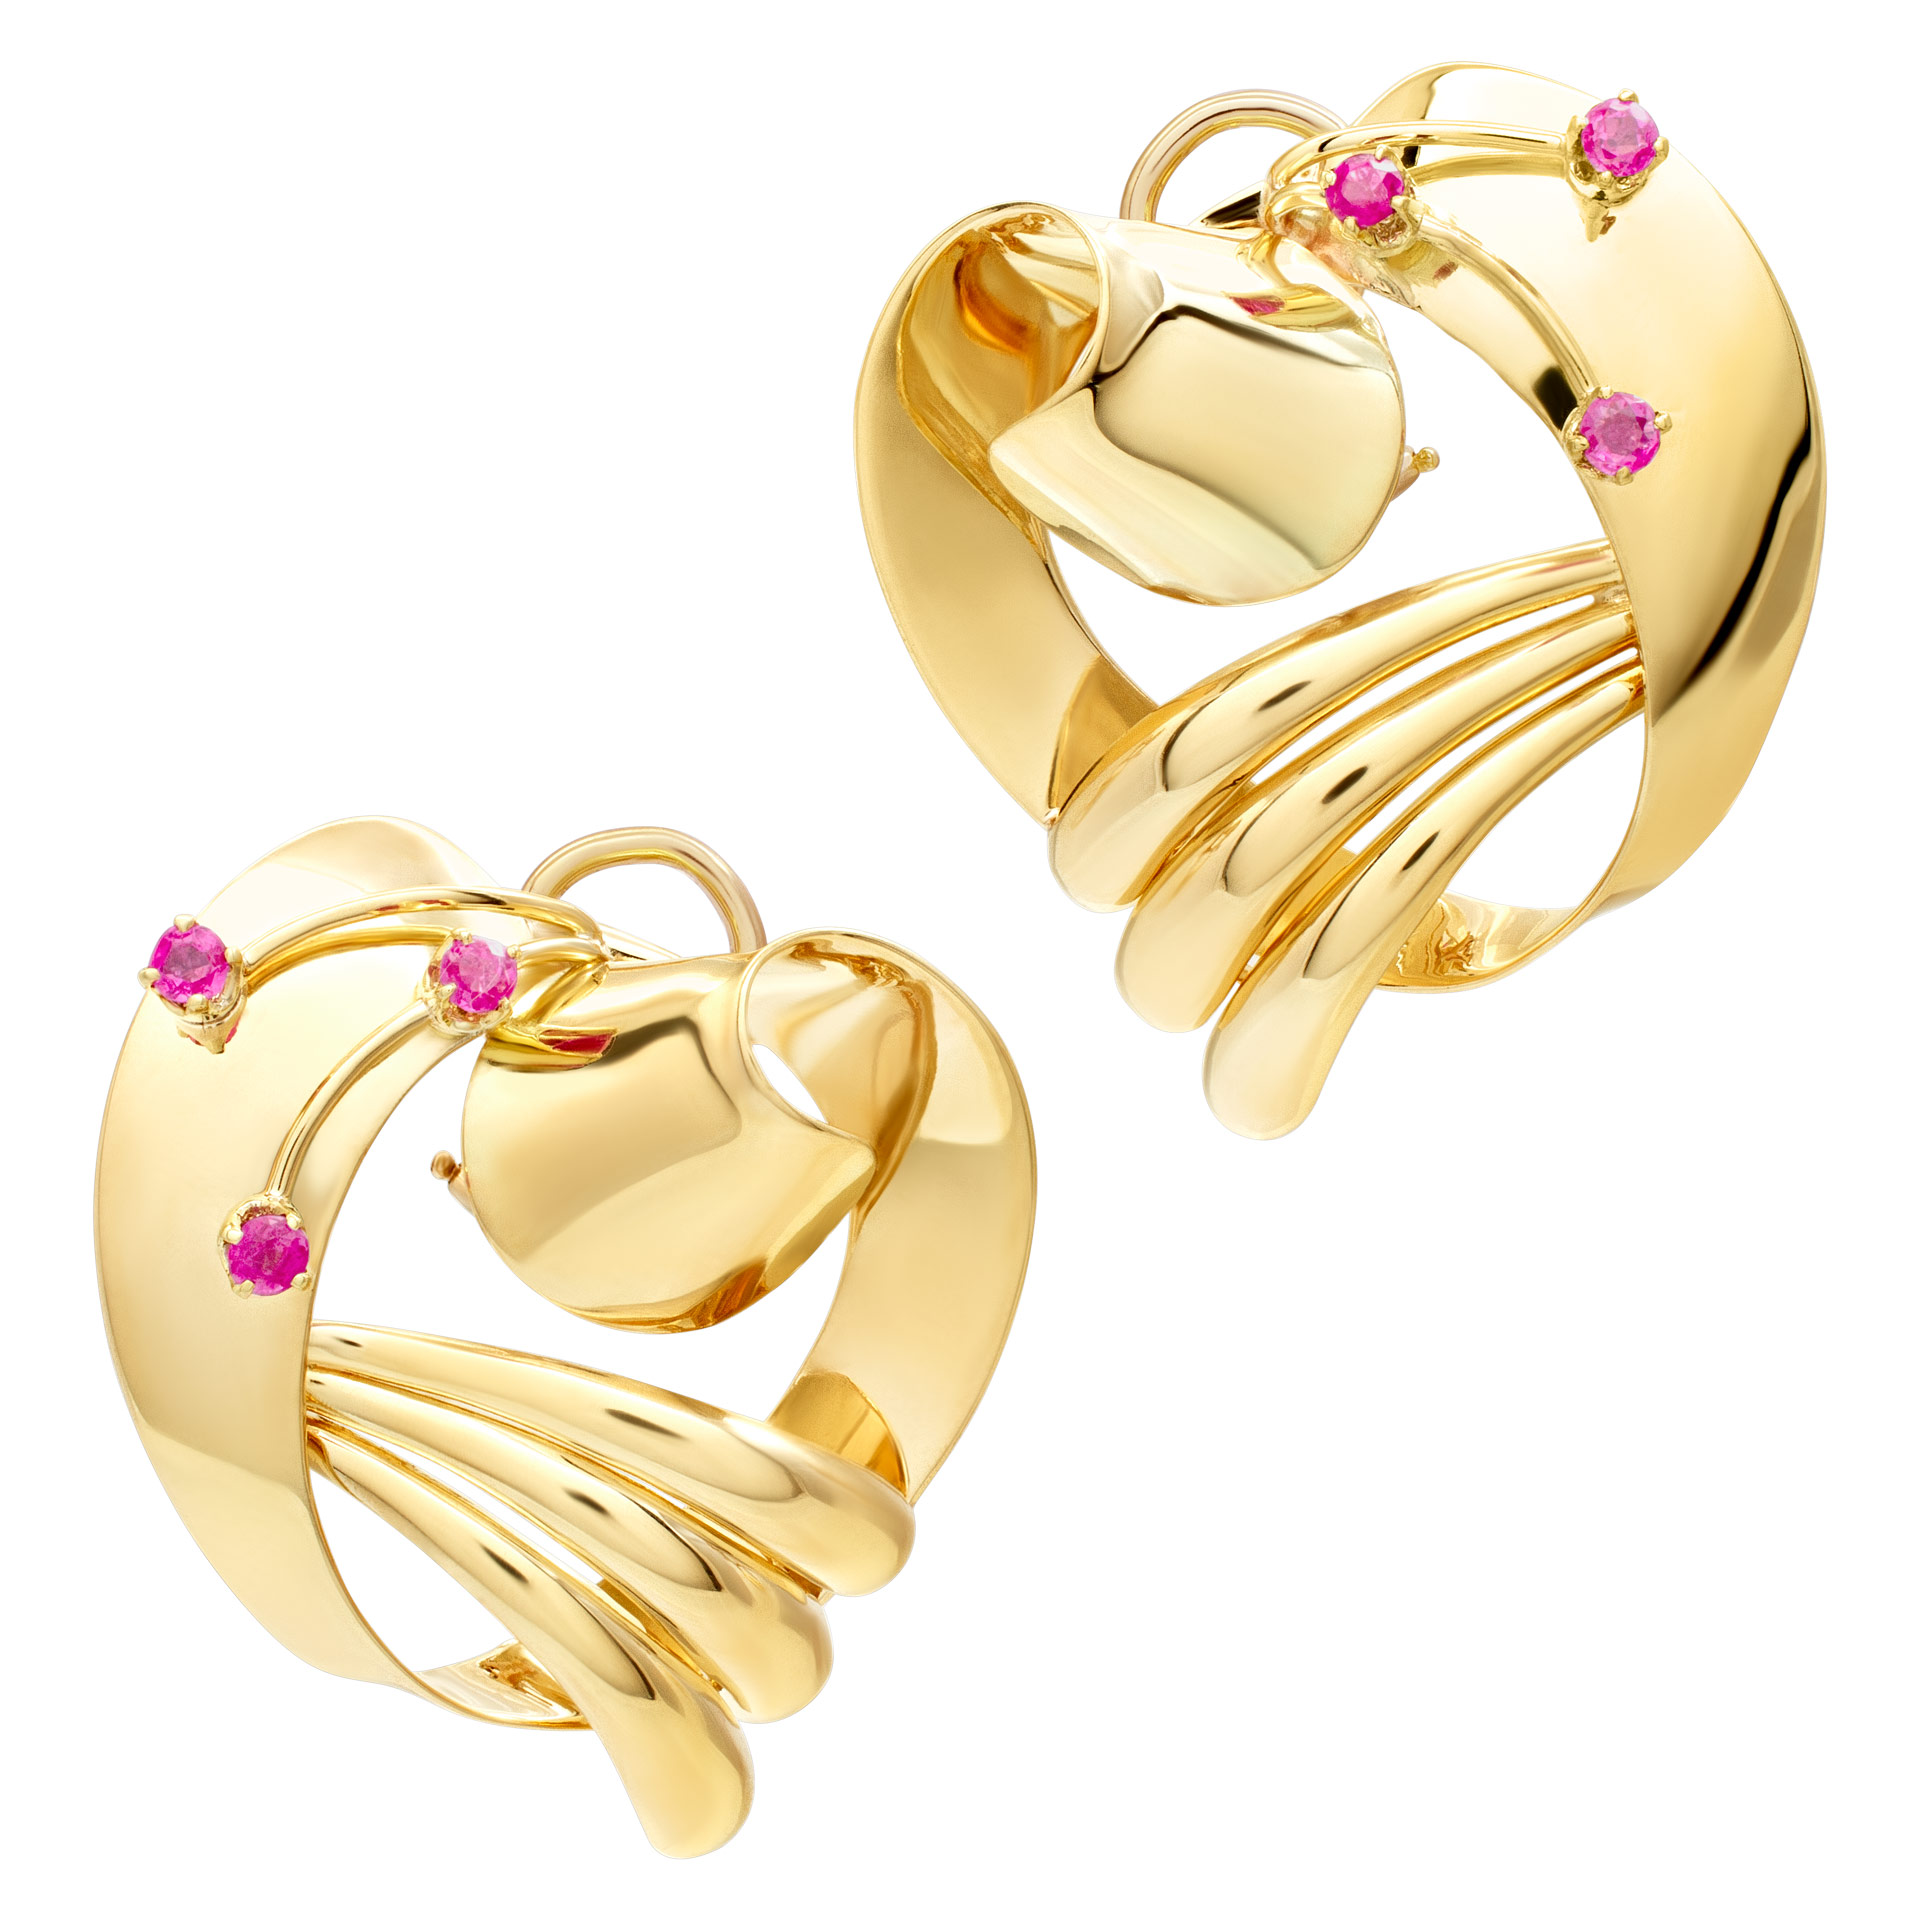 Gorgeous earrings with ruby accents in 14k yellow gold